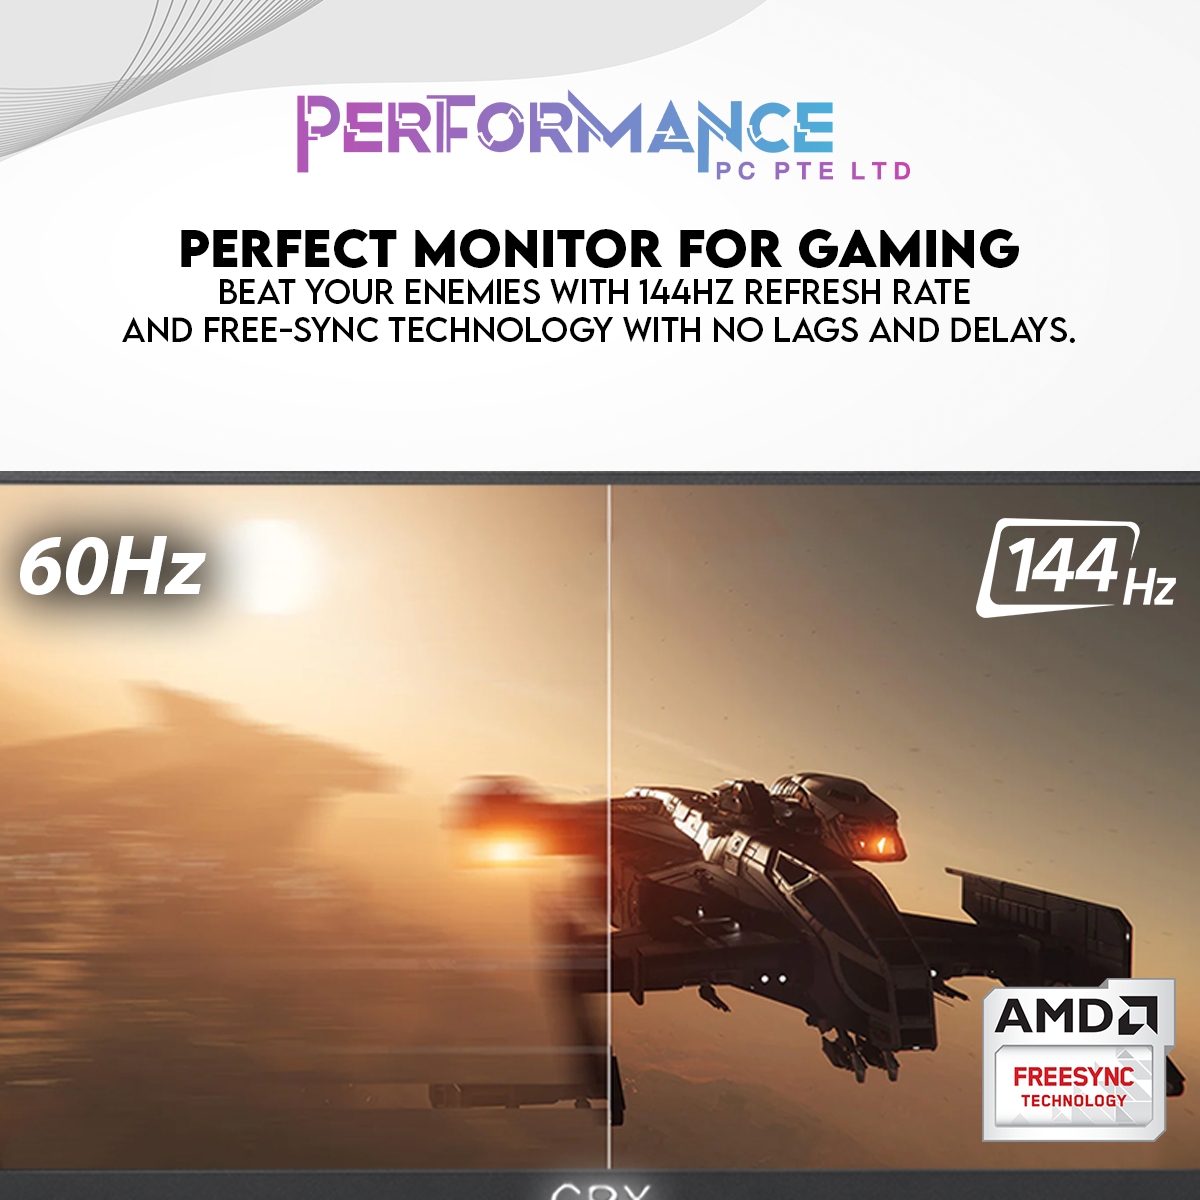 CRX Portable IPS Monitor For Gaming / Office / Student 13.3 / 15.6 / 16.0 / 17.3 / Full HD 1080P / QHD 1440P / 144hz / 165hz / IOS Device / Android / Desktop PC / Laptop / Extension / Duplicate[Local Ready Stock With Local 3 Year Warranty]